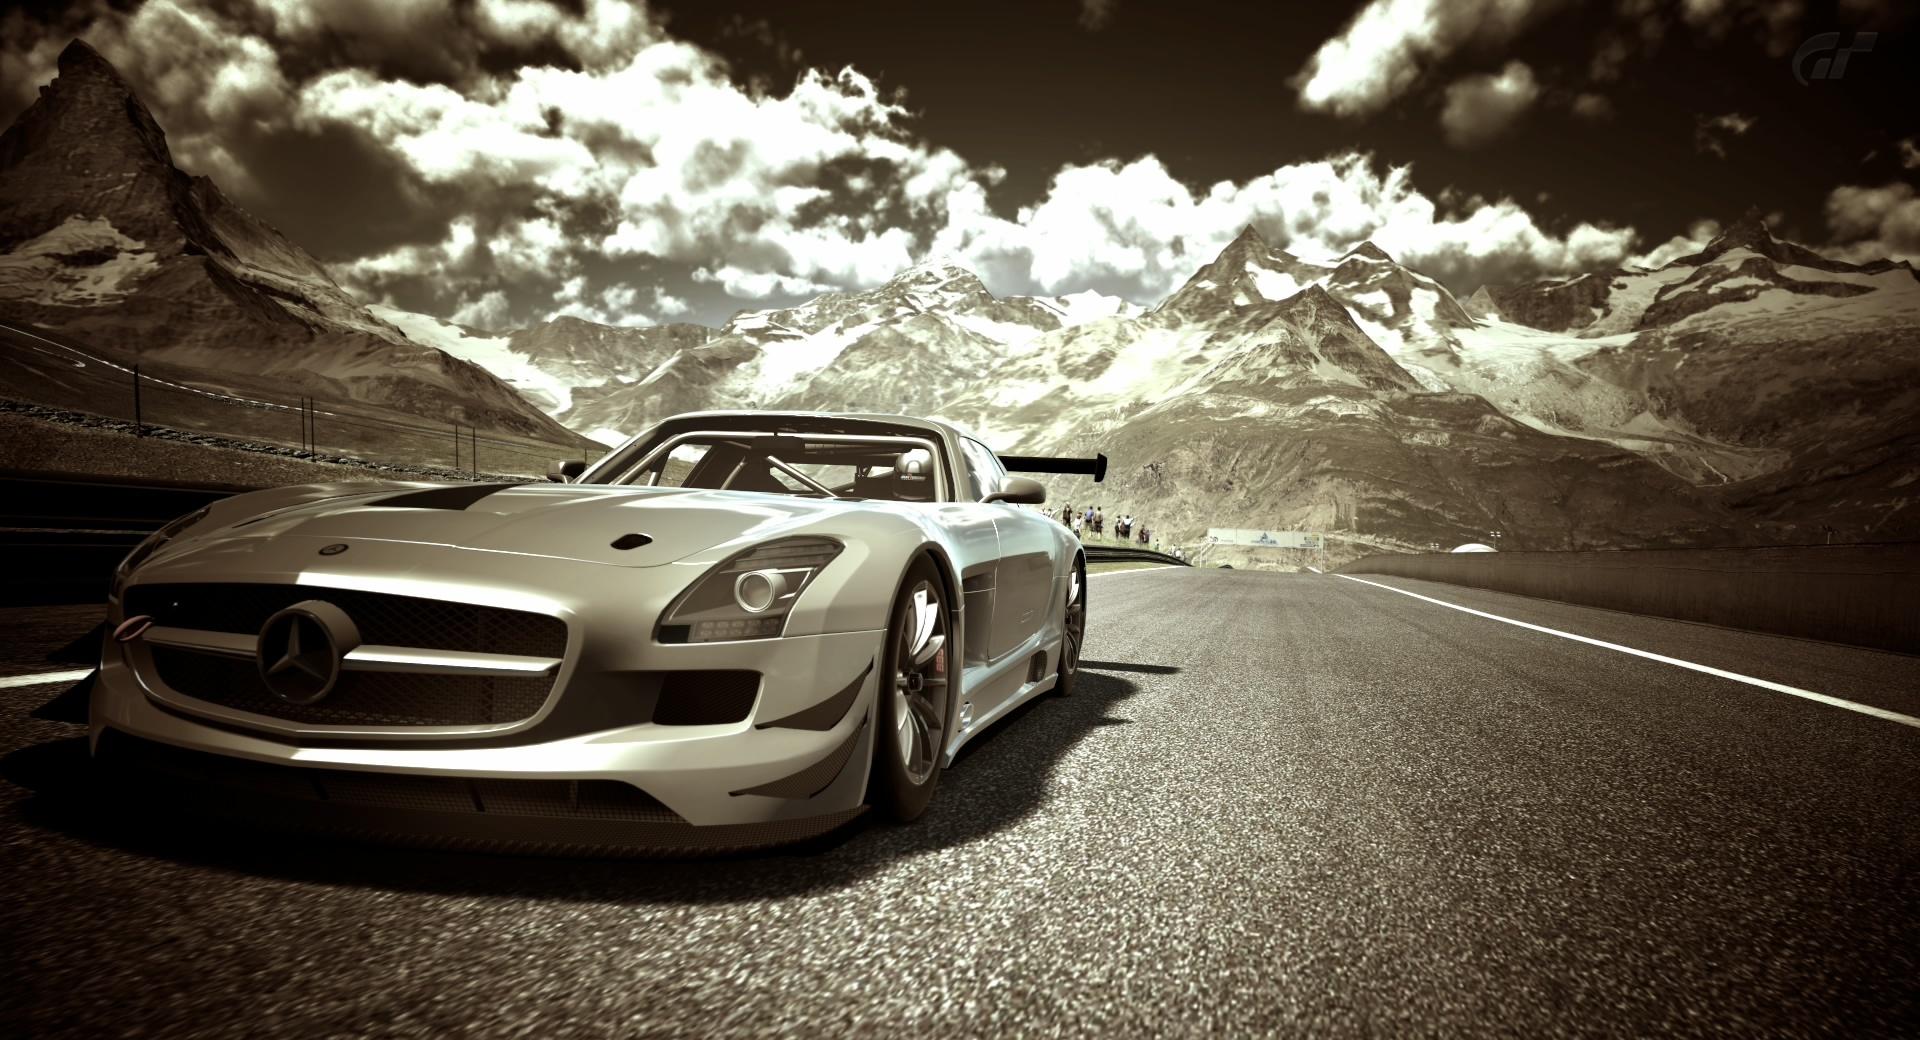 Gran Turismo Mercedes Race Car wallpapers HD quality